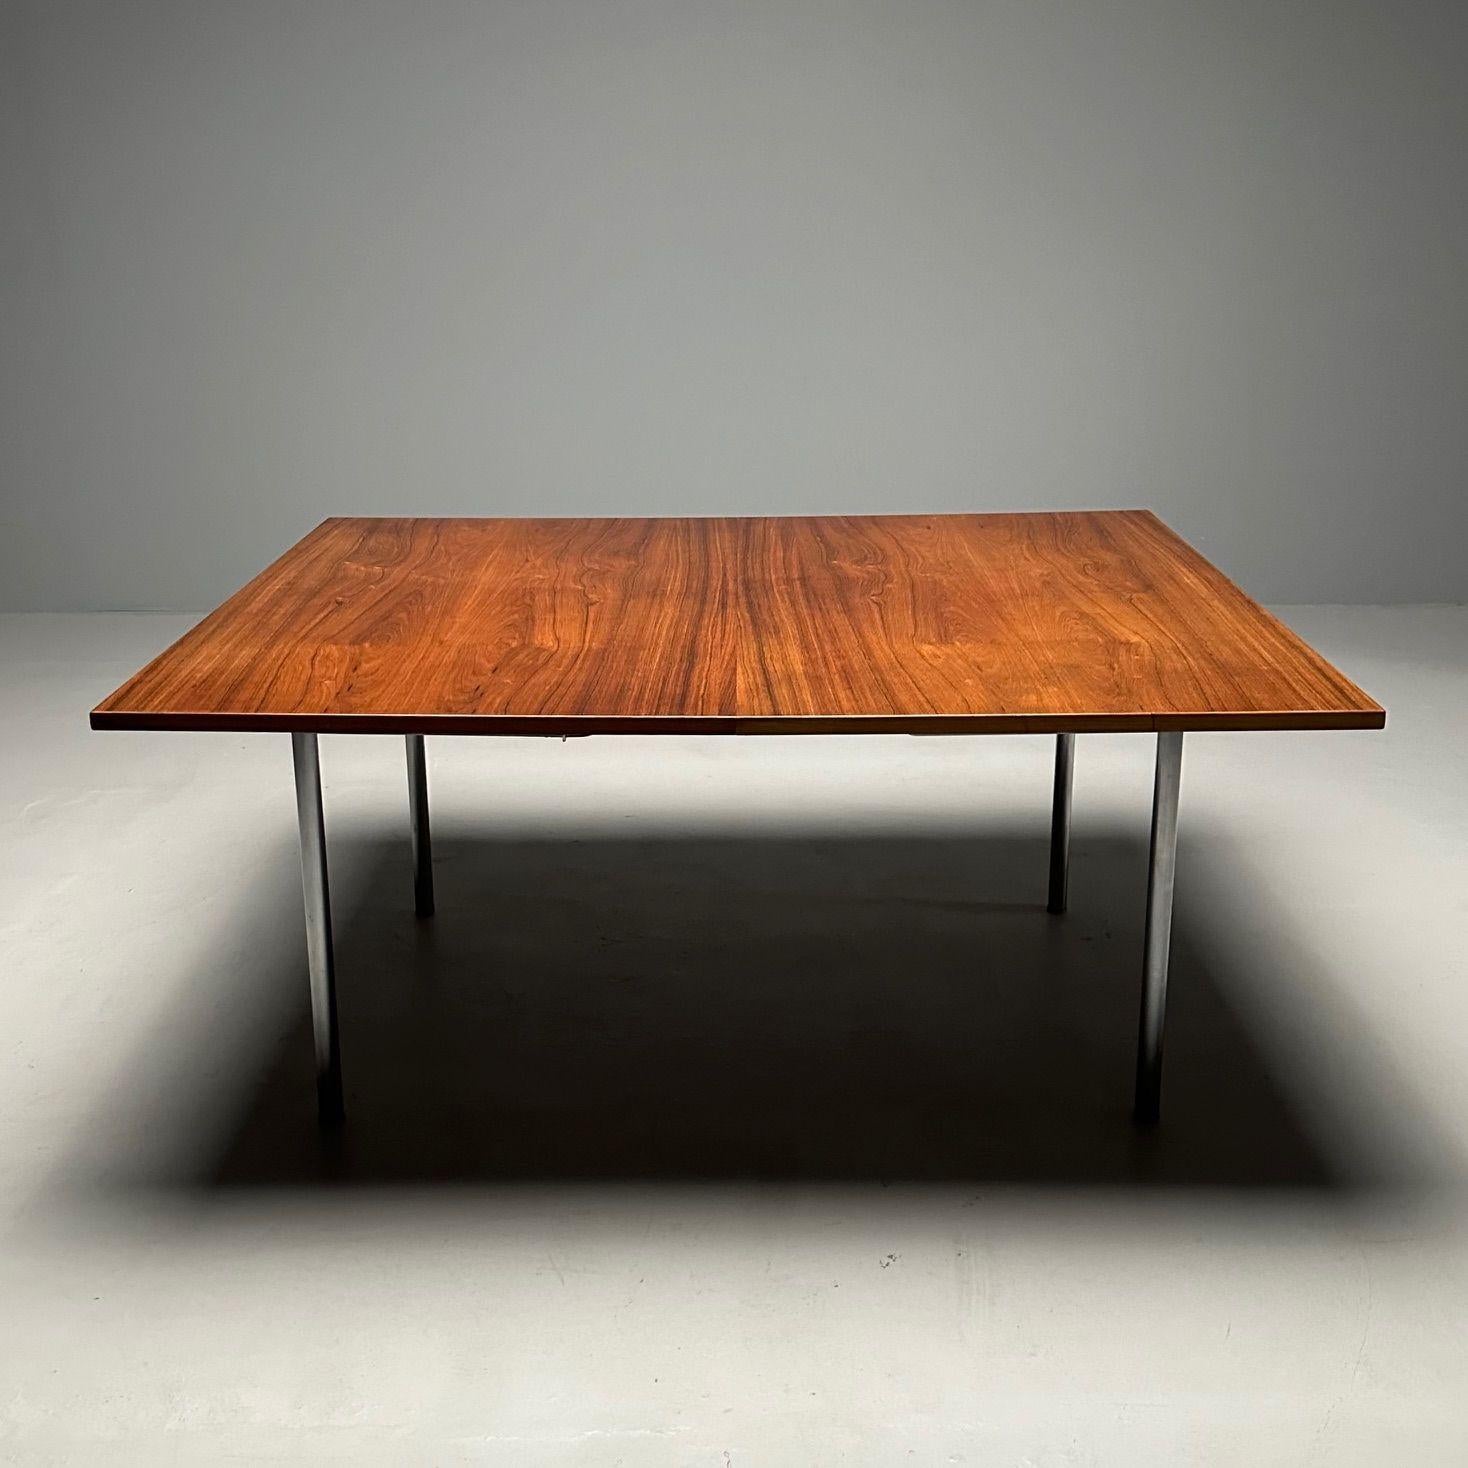 Mid-Century Modern Hans Wegner (1914-2007) Dining Table Model AT321 Andreas Tuck, Denmark

Rare dining table with two very large leaves designed by Hans J. Wegner for Andreas Tuck. Produced in Denmark circa 1970s - this table maintains it's original